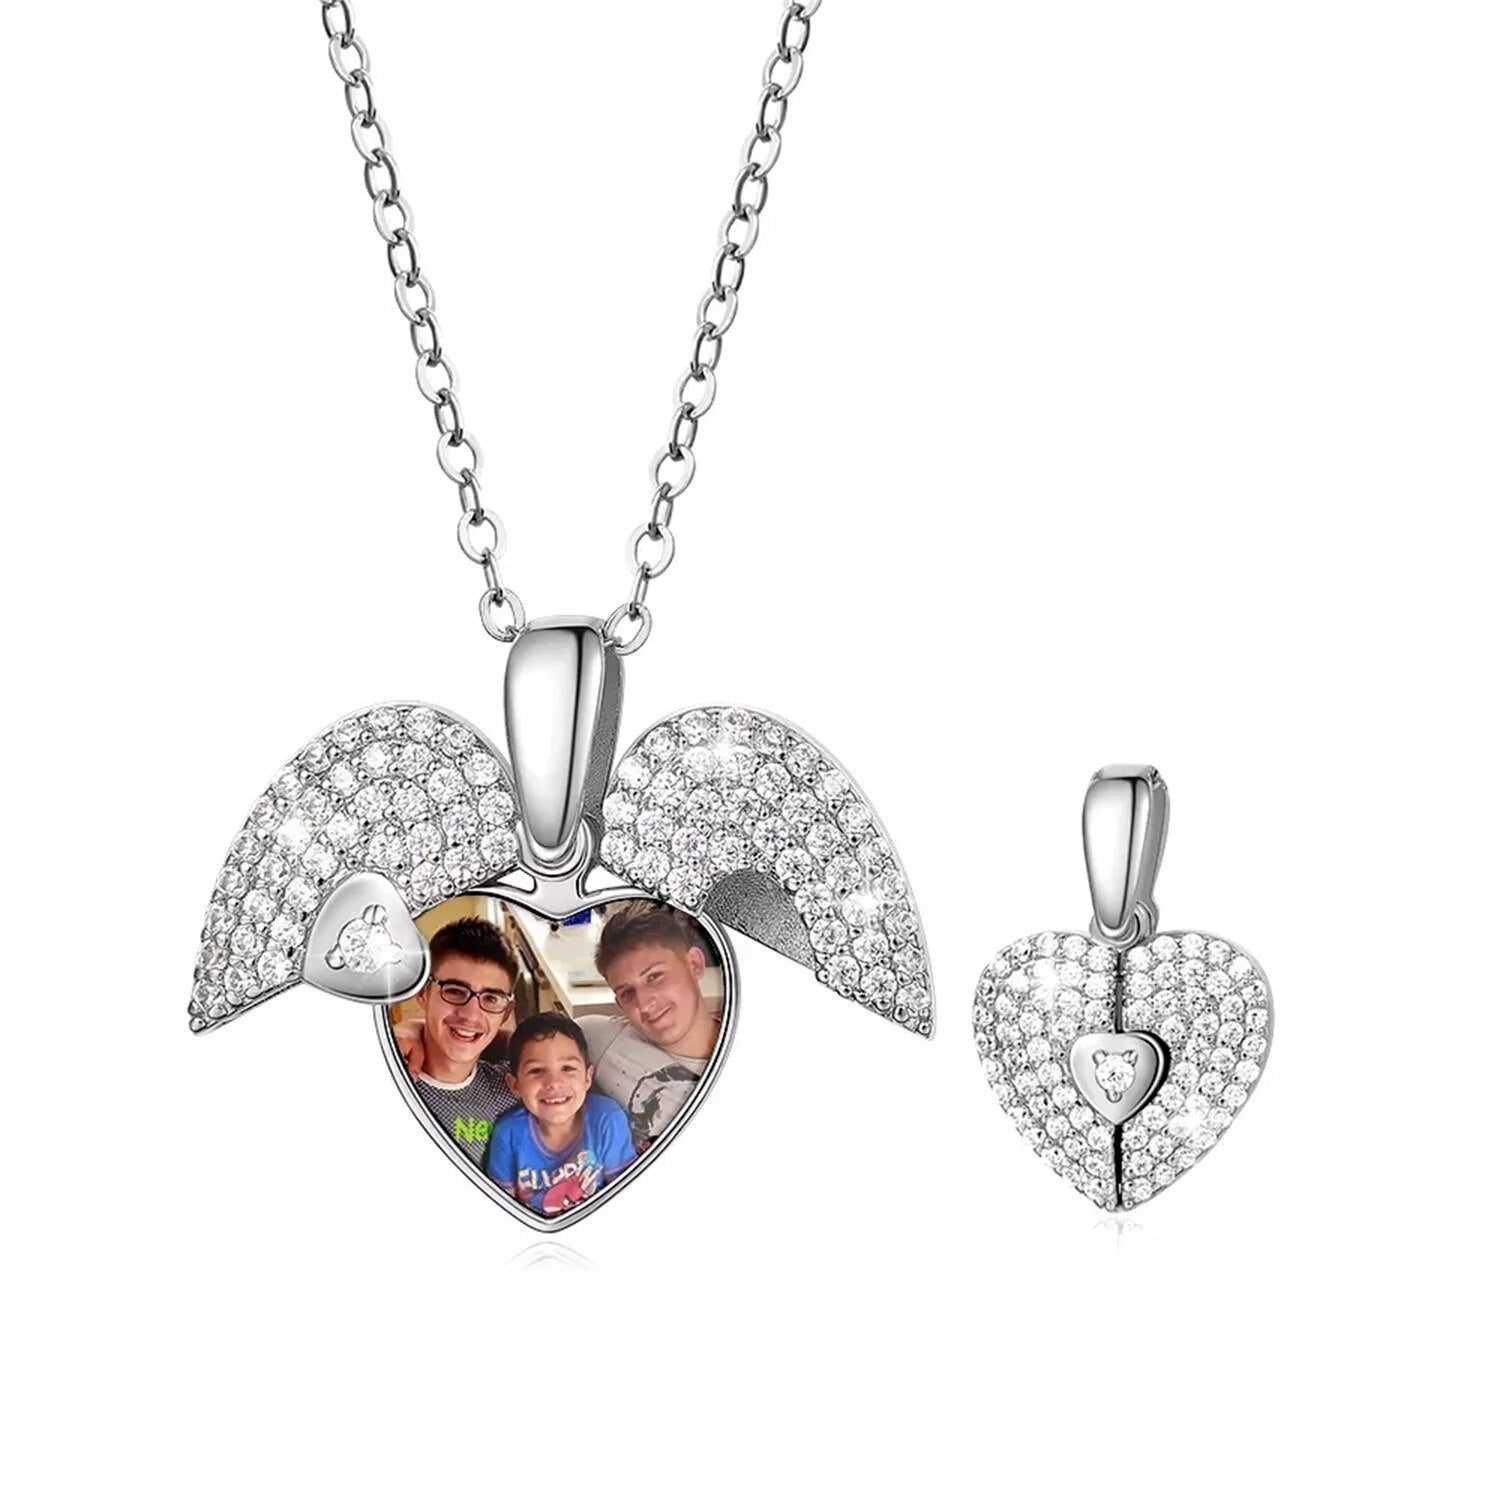 Personalized Heart Photo Locket Necklace